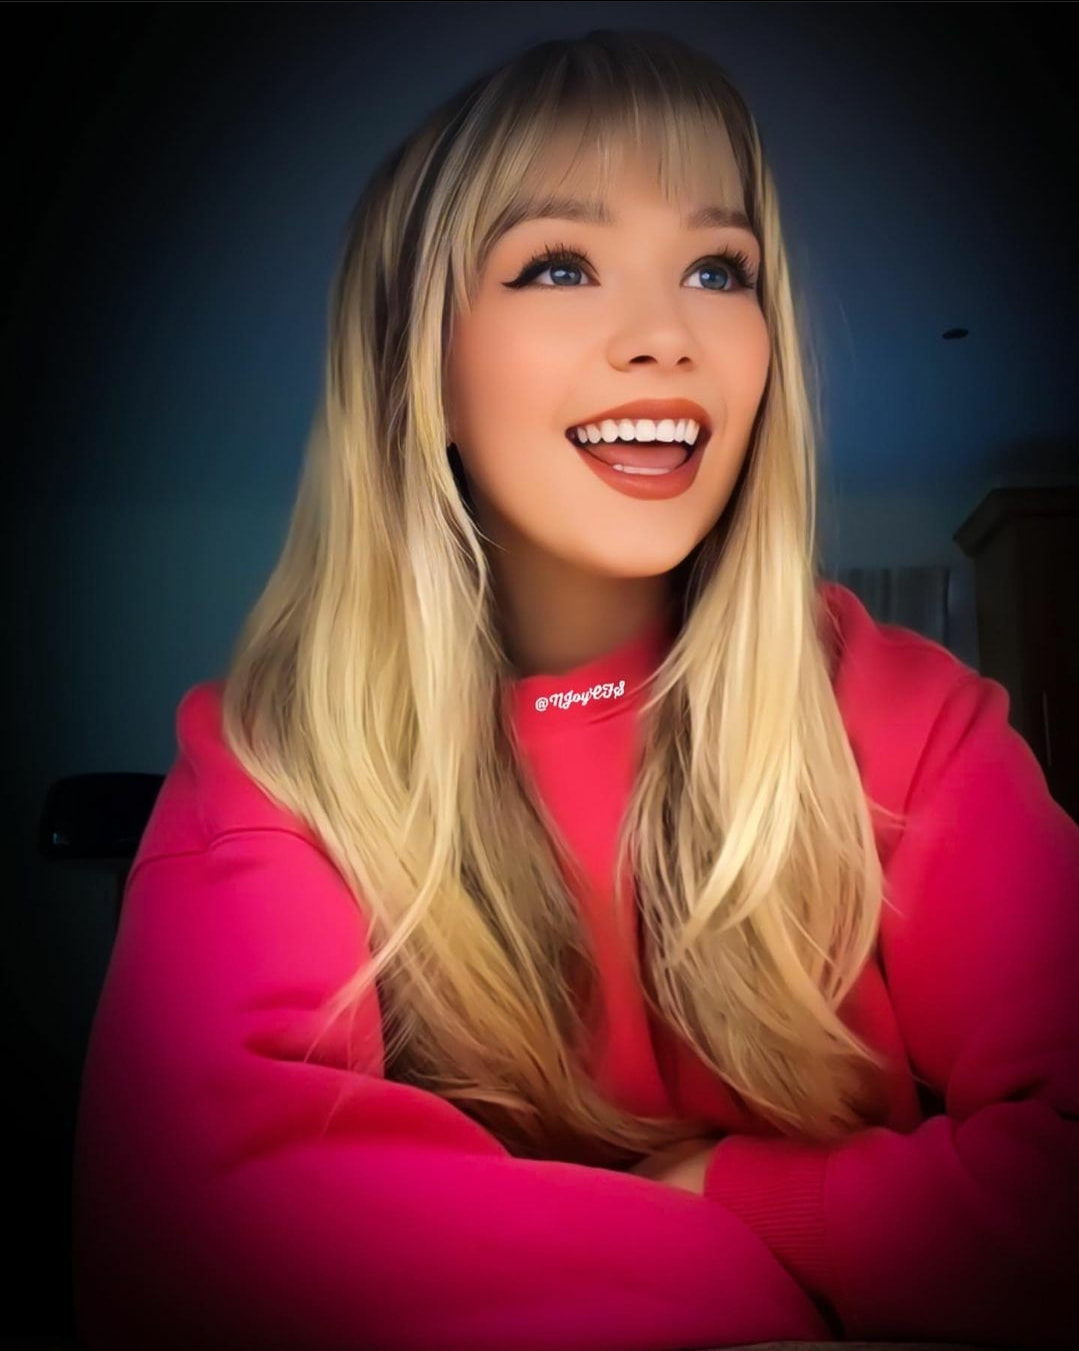 Thank You - Dido - (Connie Talbot) Cover 